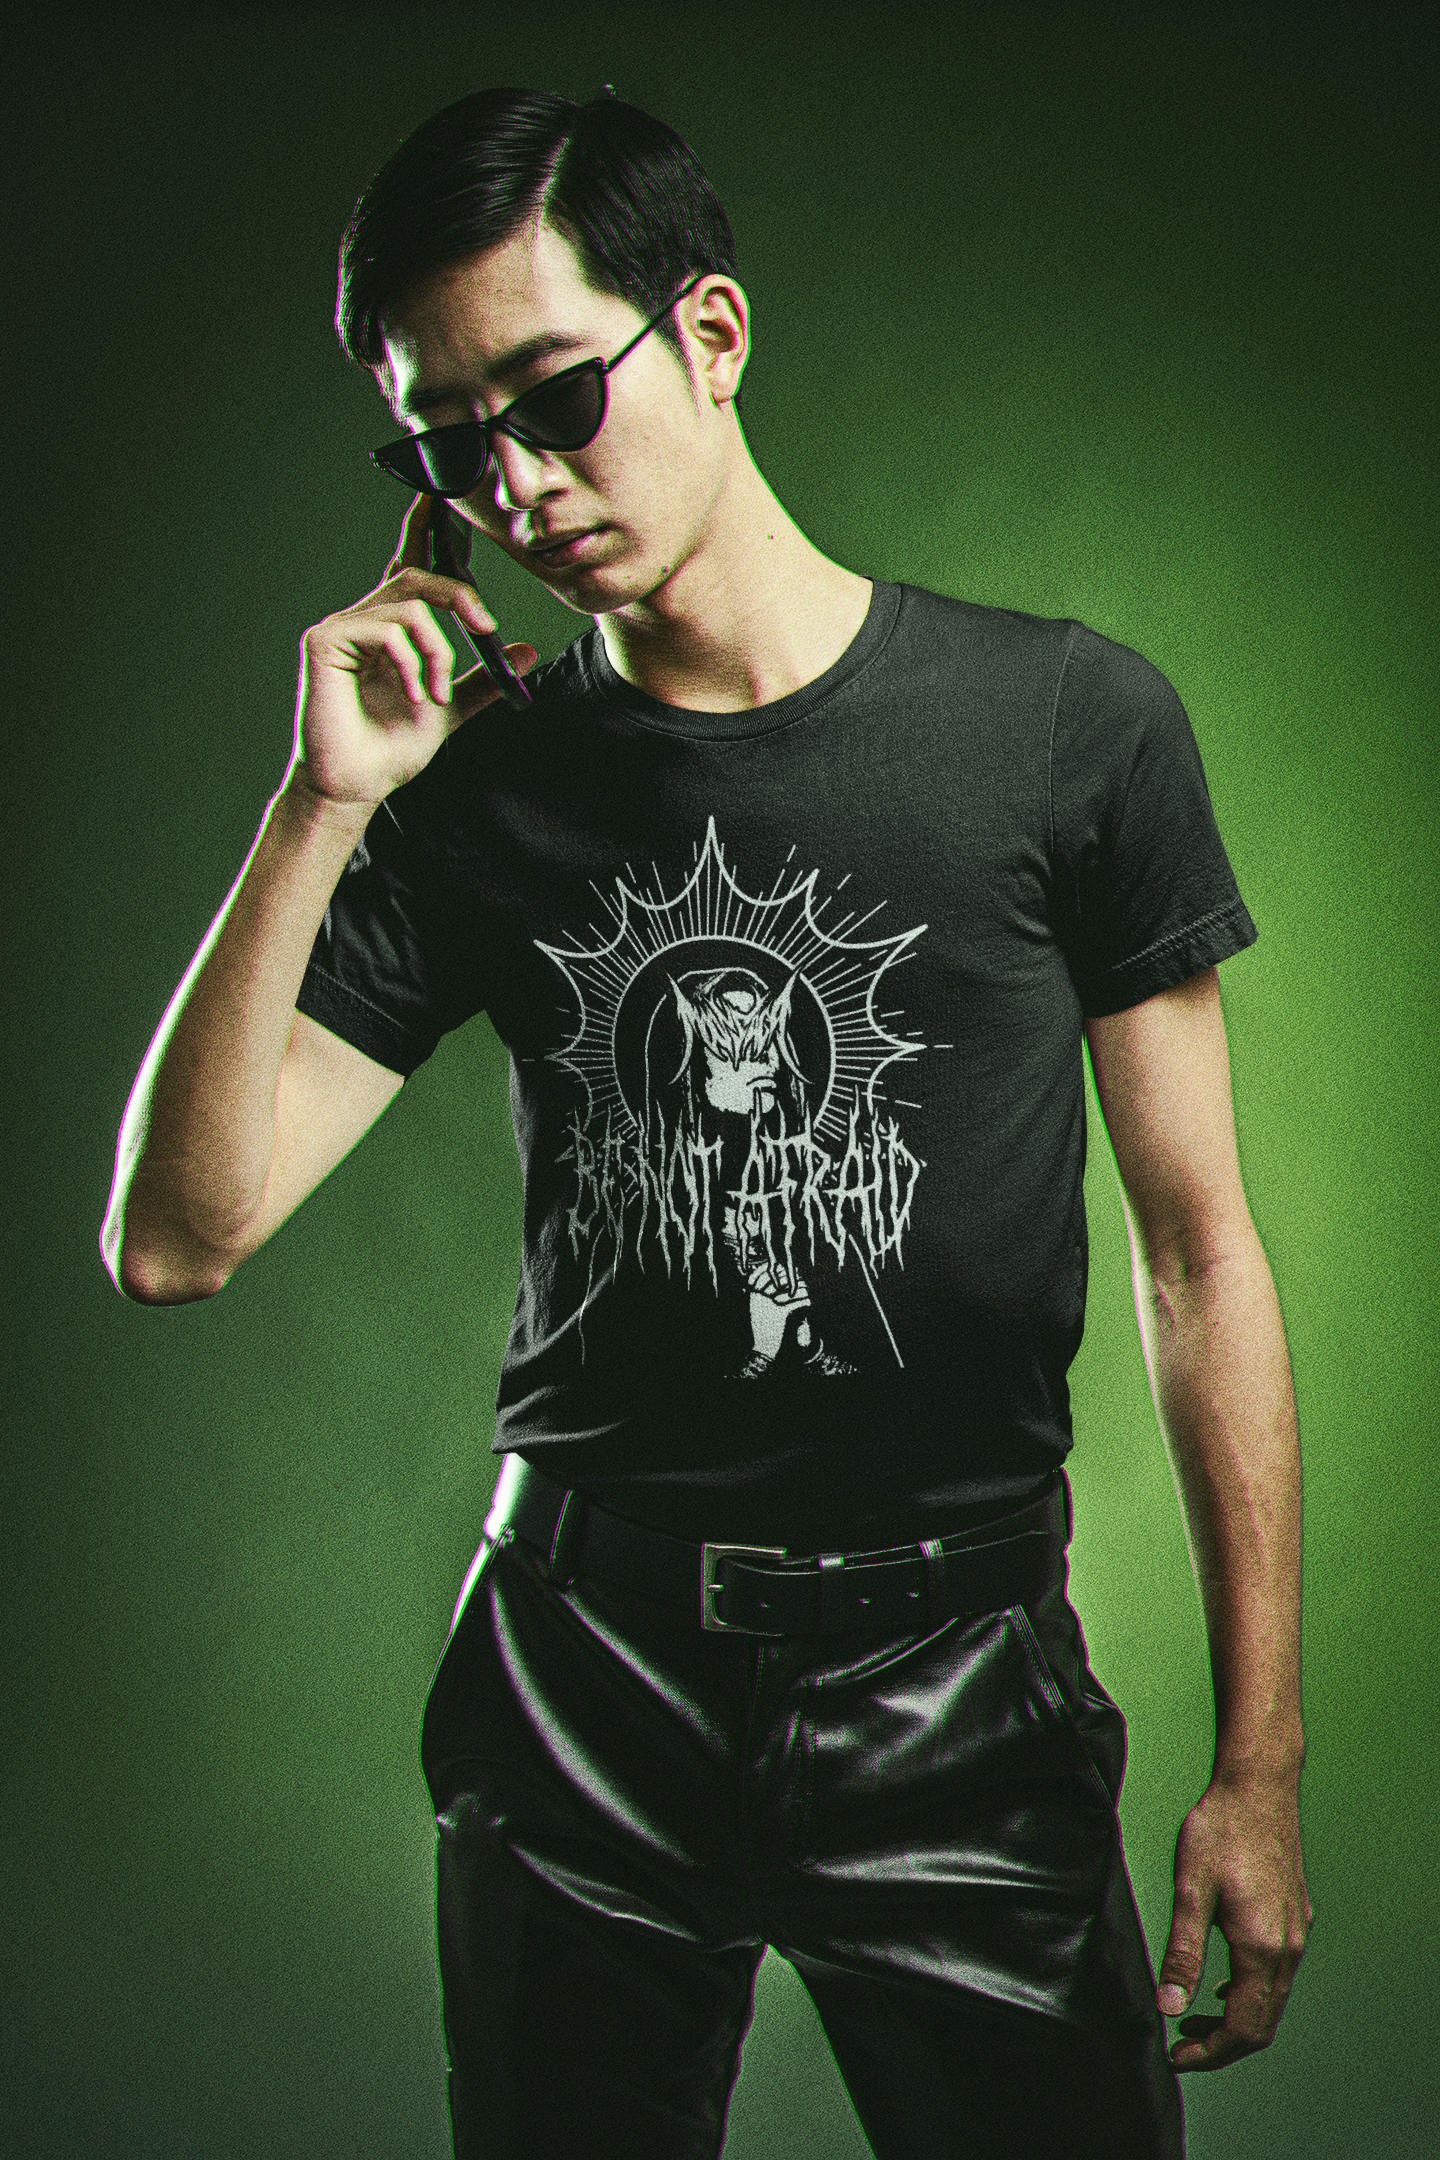 t-shirt-mockup-featuring-a-man-in-a-matrix-inspired-outfit-making-a-call-m20638 (1).png